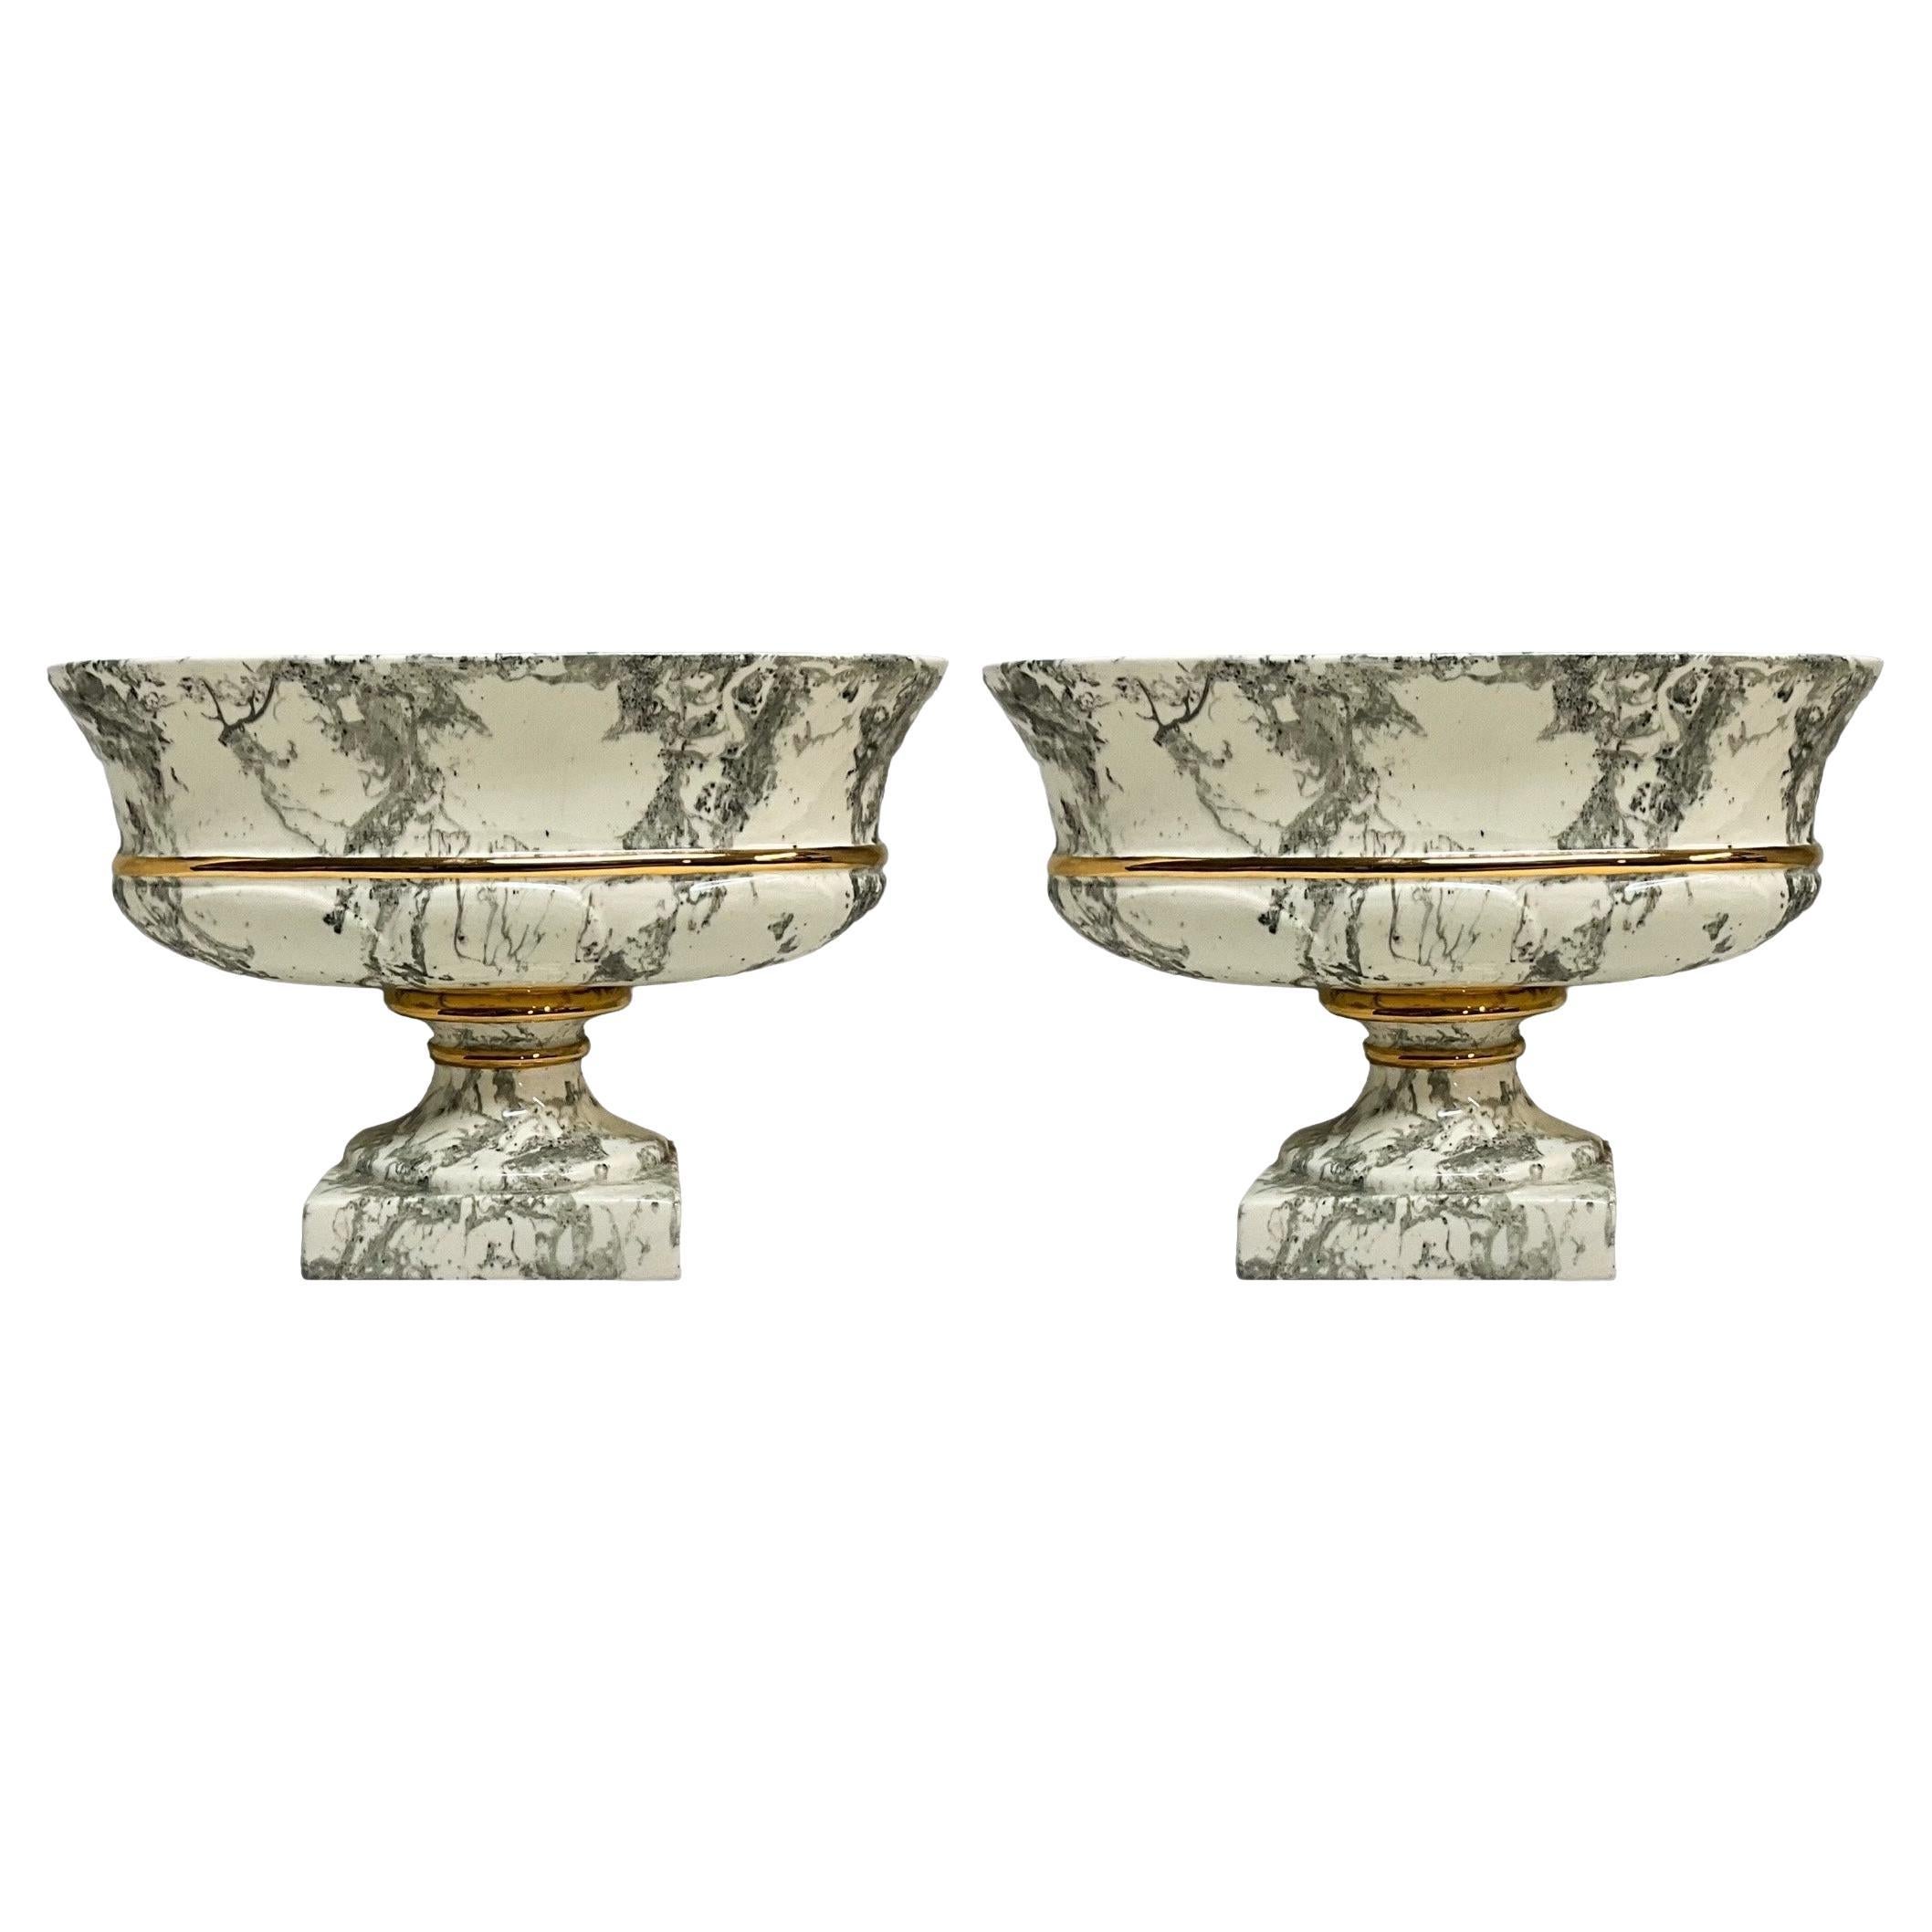 Mid-Century Neo-Classical Style Faux Marbleized Mantel Planters / Cachepot - S/2 For Sale